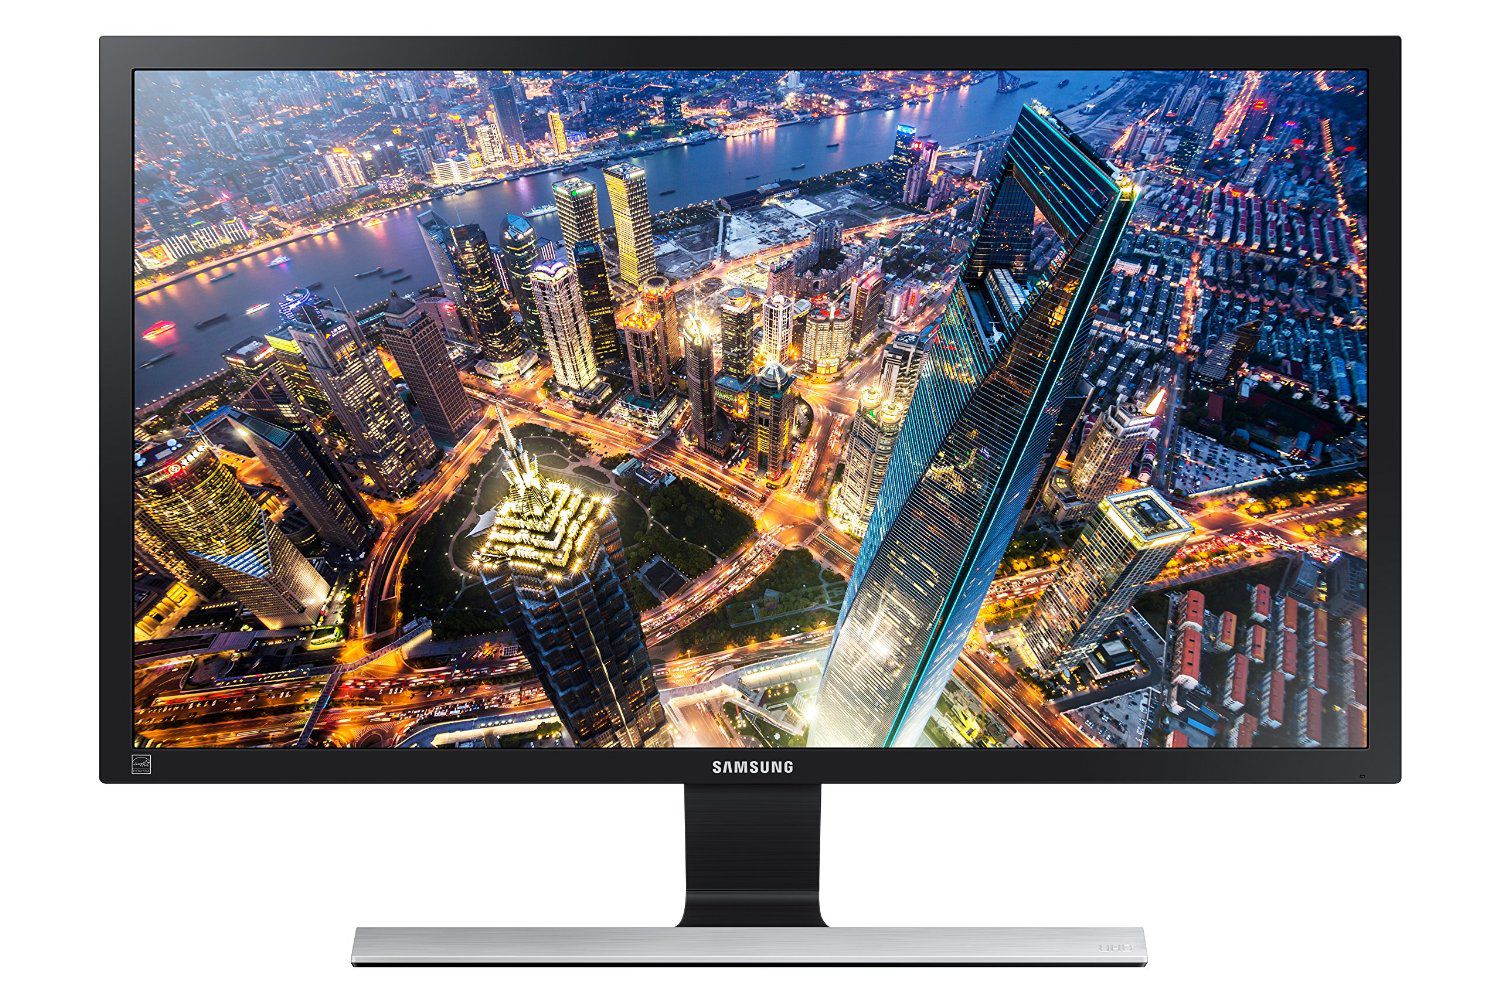 The 9 Best Computer Monitors to Buy in 2018